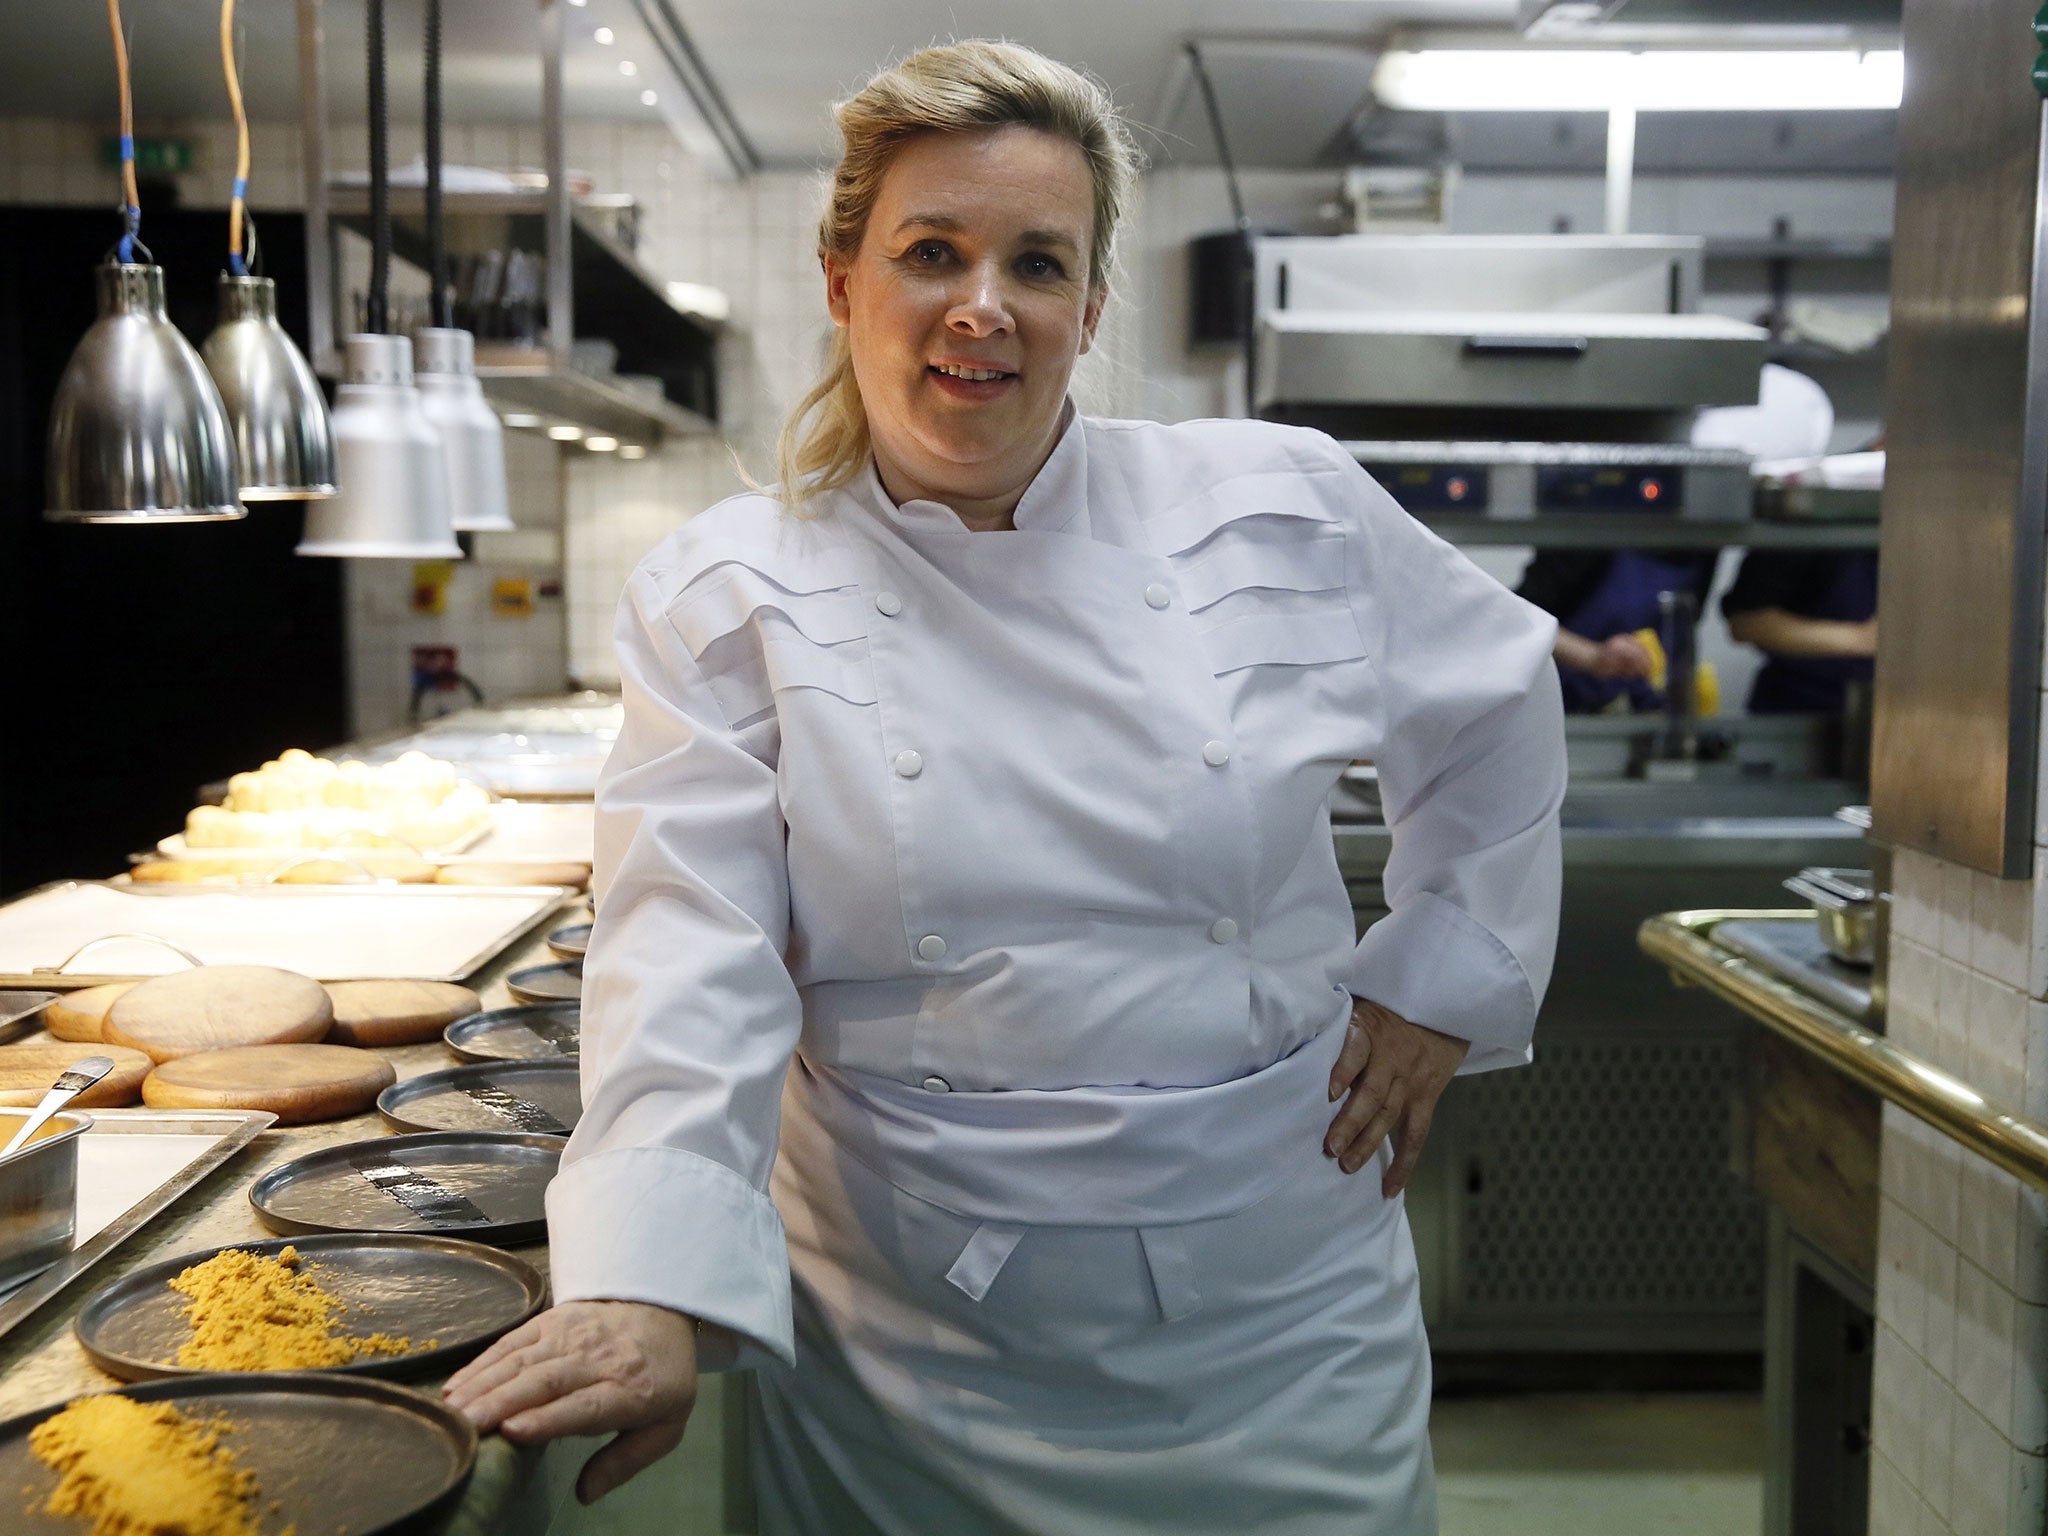 Hélène Darroze in the kitchen of her Paris restaurant. She also has a restaurant at The Connaught in London